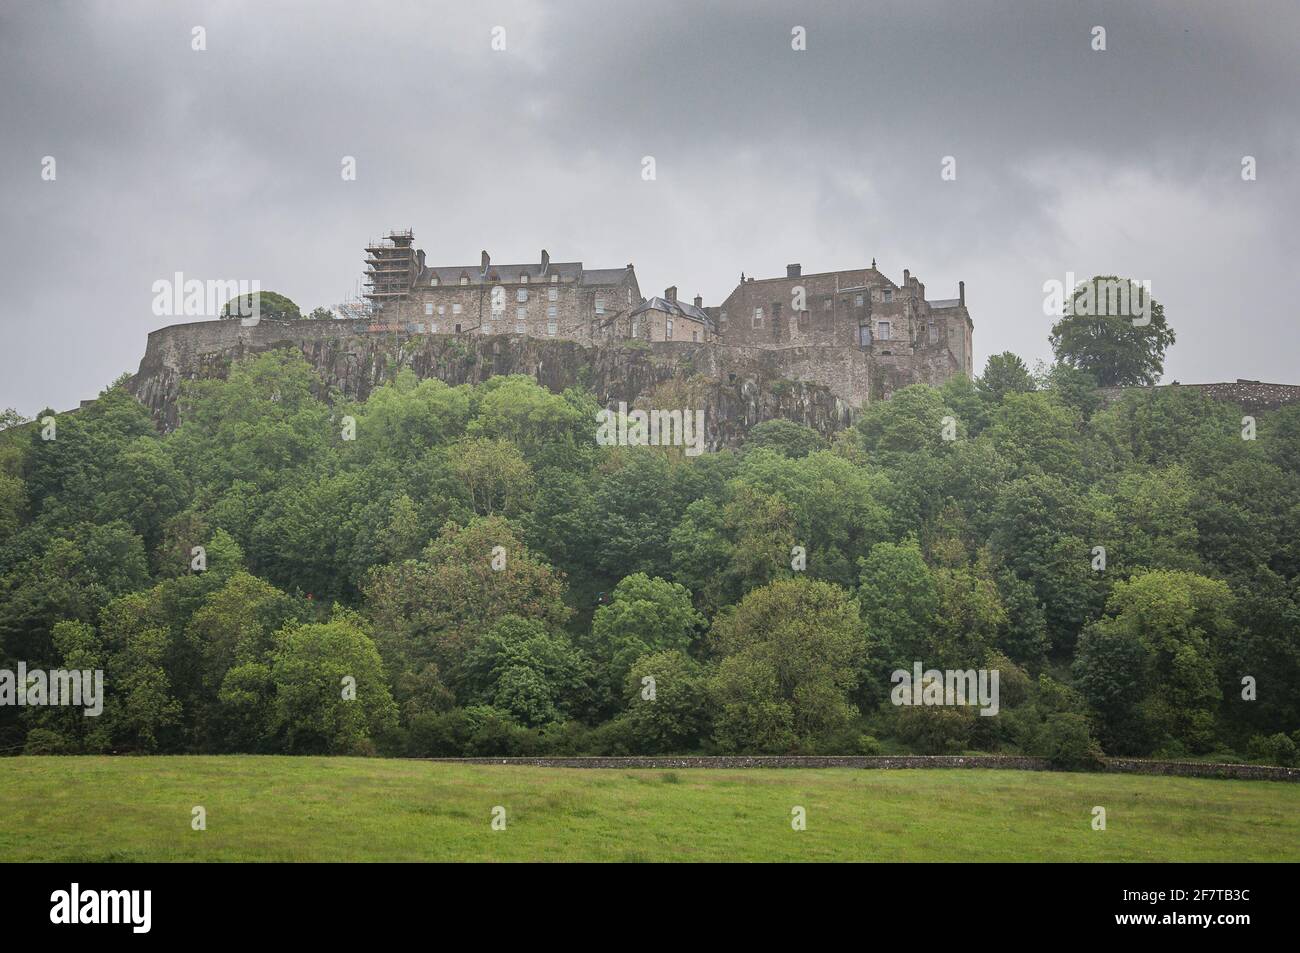 Imposing Stirling Castle on a cloudy day. Concept: typical Scottish landscapes Stock Photo